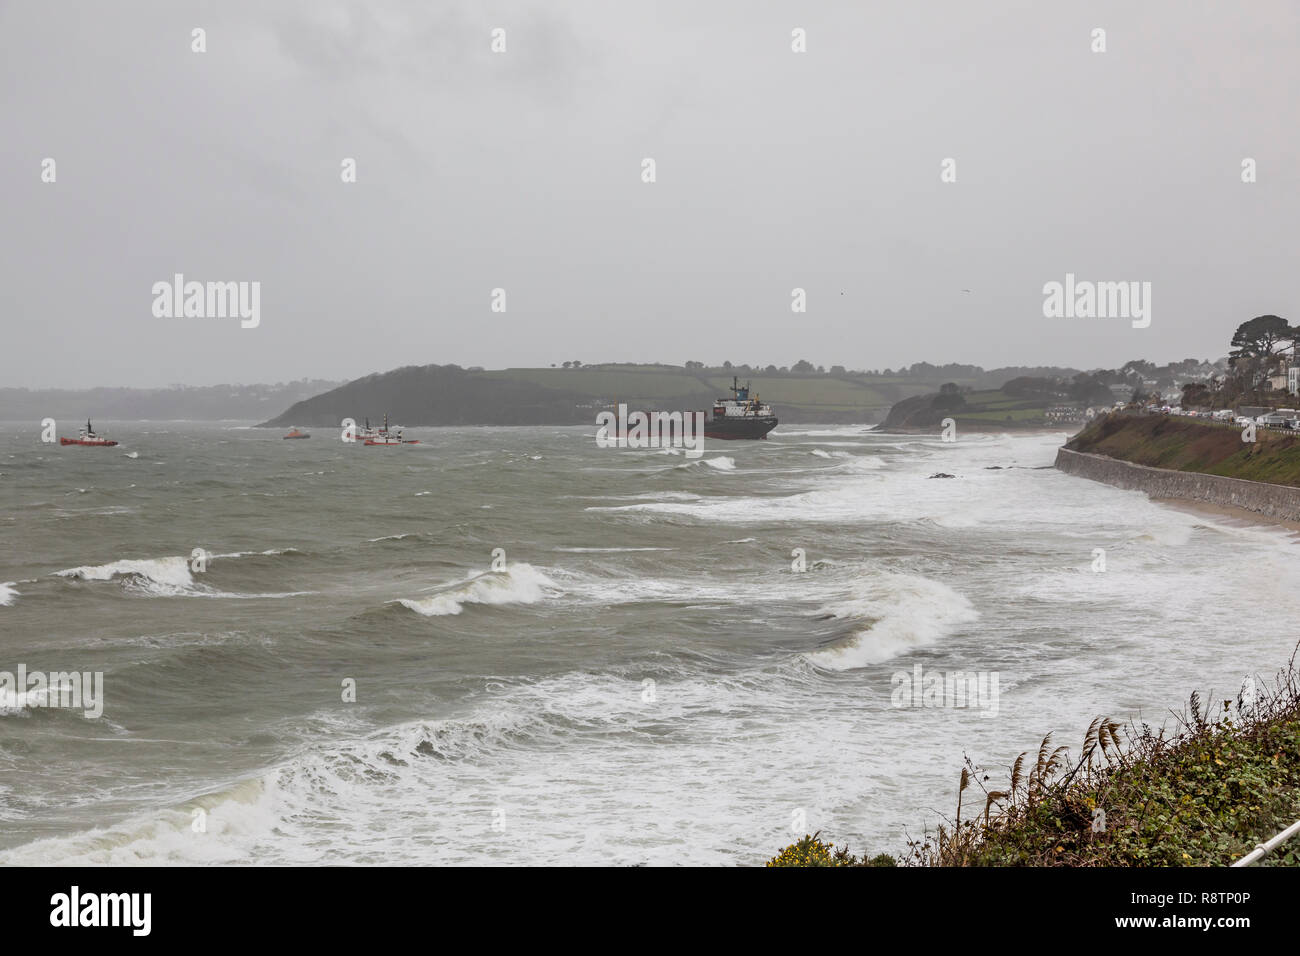 Falmouth, Cornwall, UK. 18th Dec, 2018. A rescue operation is under way after a 16,000-tonne Russian cargo ship the Kuzma Minin ran aground off Gyngvase beach in Cornwall in the early hours of the morning of Tuesday 18th December . The coastguard believes that strong gale force winds overnight caused the ship to drag its anchor and become stranded on the beach despite all te efforts of the crew. Locals have been warned to keep off the beach as rescuers attempt to re-float the vessel. Credit: Roger Hollingsworth/Alamy Live News Stock Photo